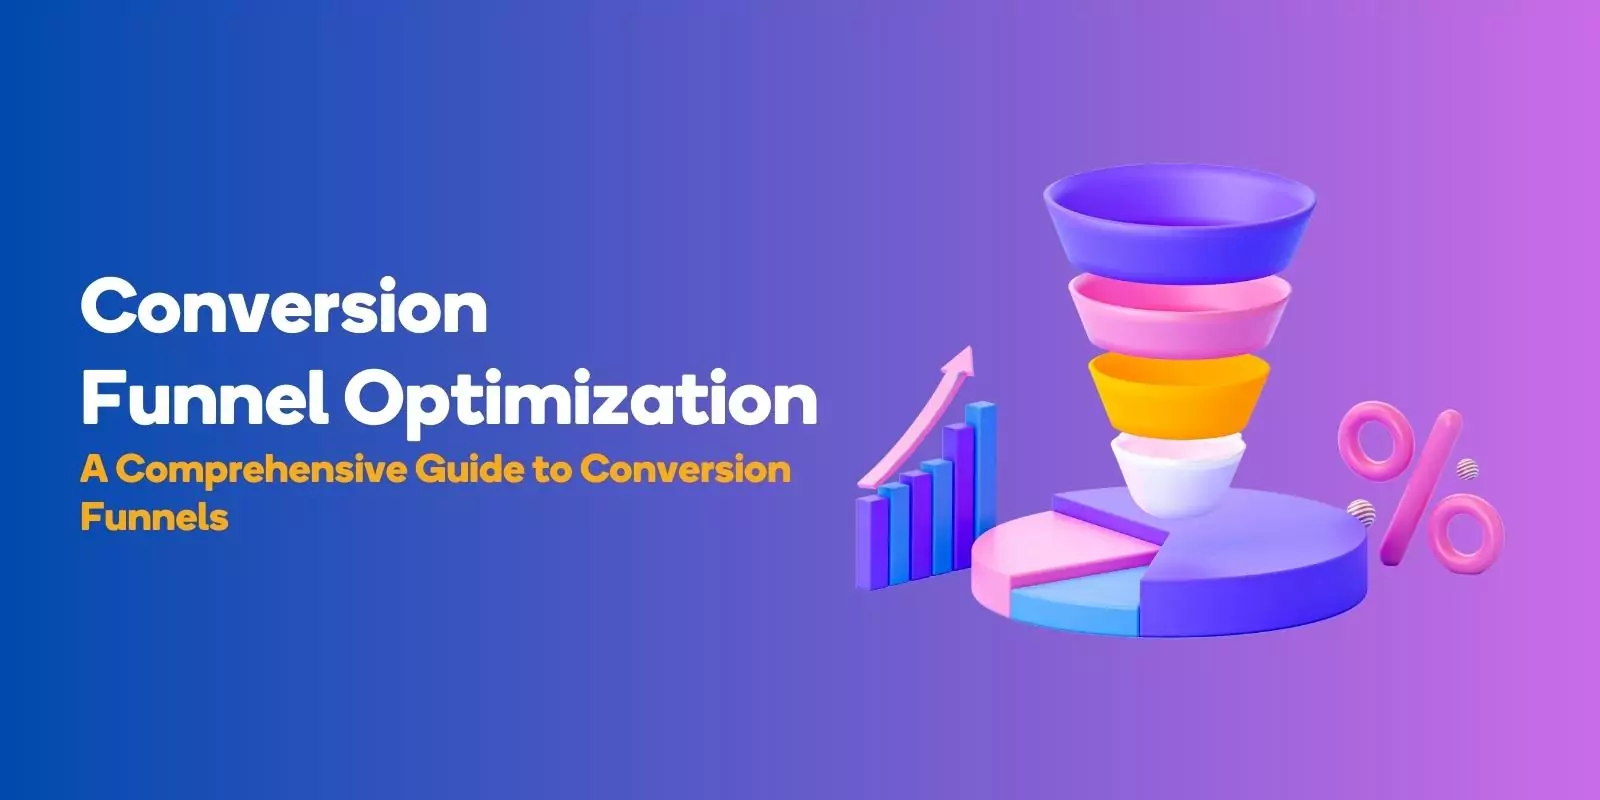 A Comprehensive Guide to Conversion Funnels